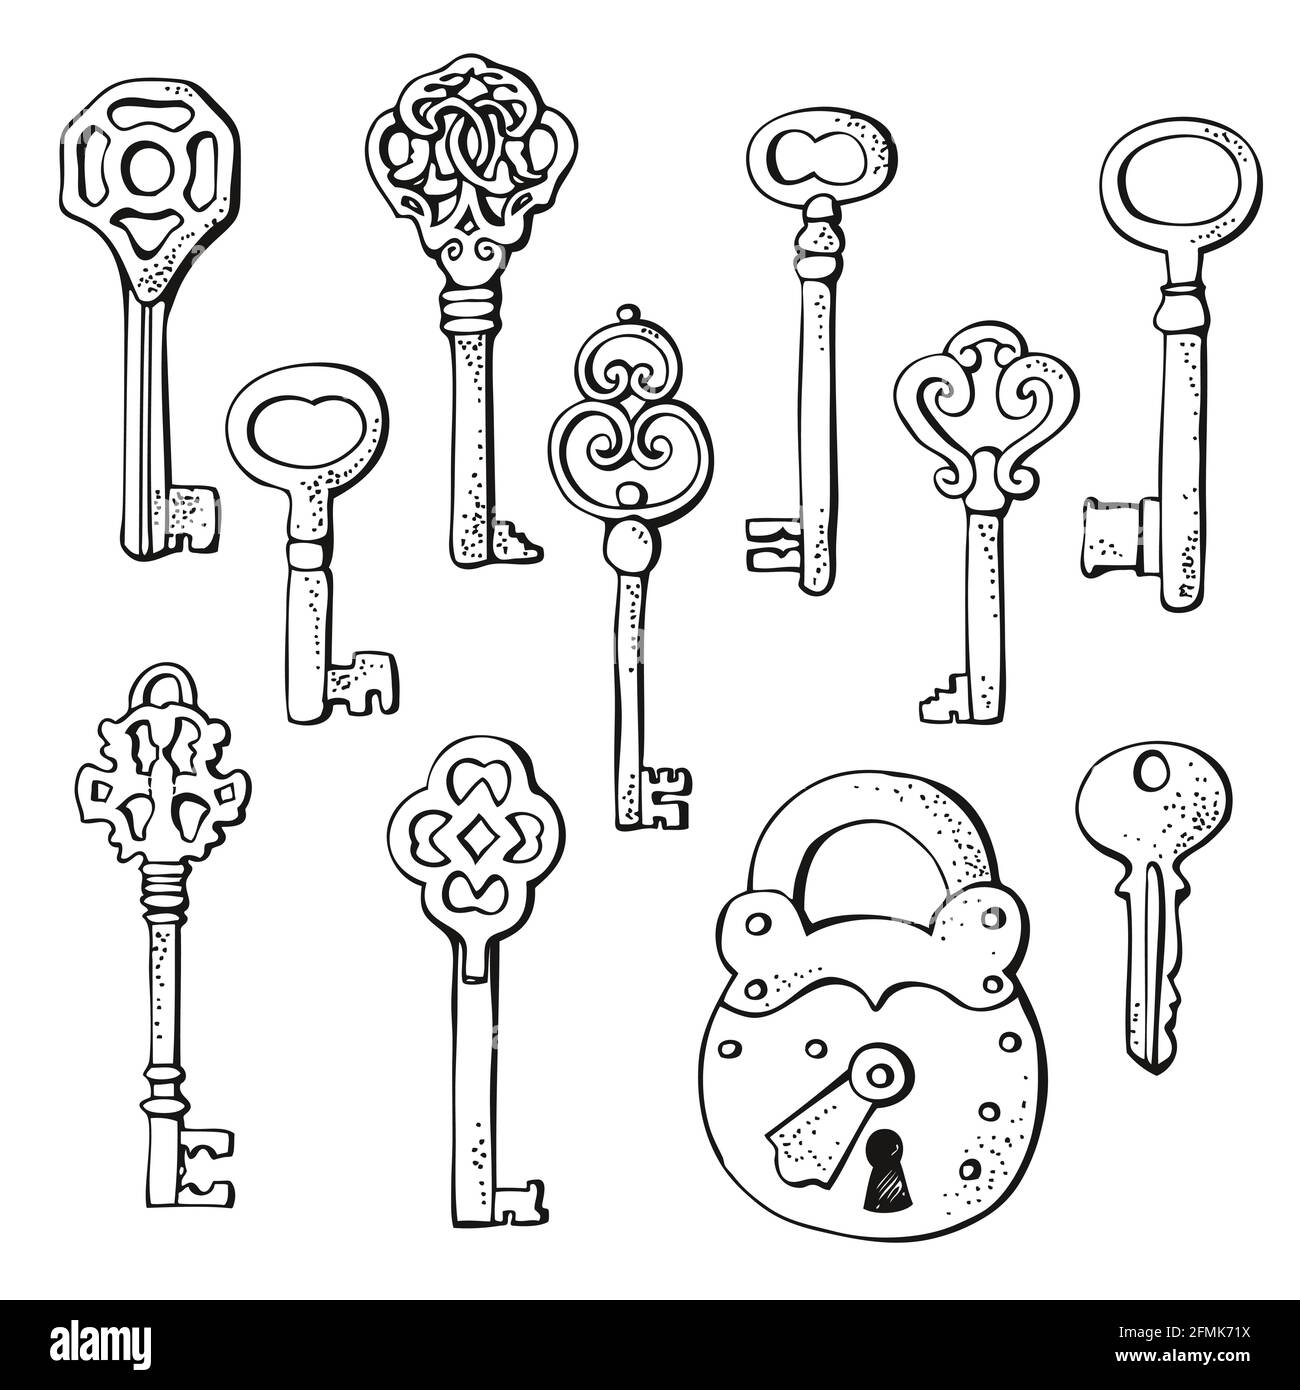 Keys vintage collection, old keys vector set with decorative elements in retro style Stock Vector